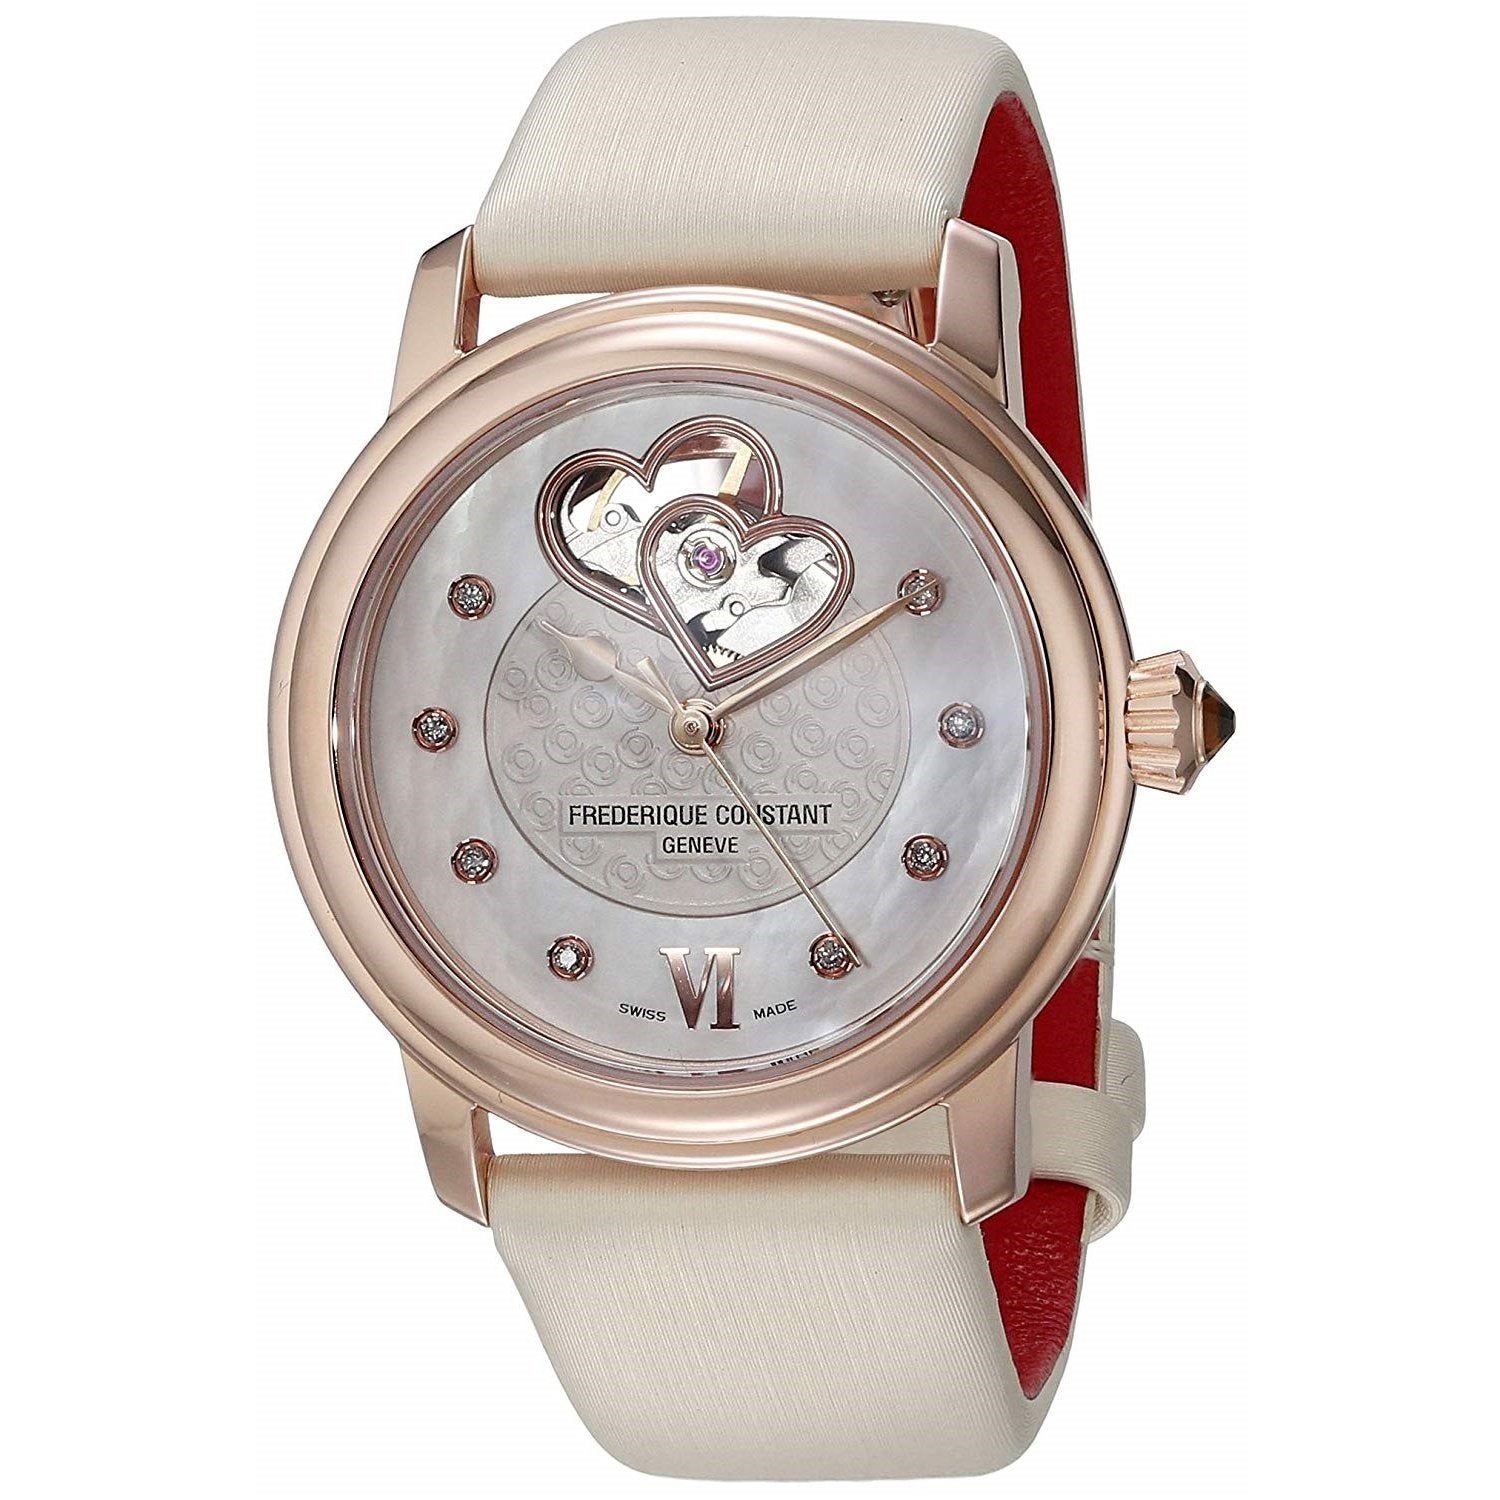 Frederique Constant Heartbeat Automatic Diamond Mother of Pearl with Skeletal Display Dial Women's Watch FC-310WHF2PD4